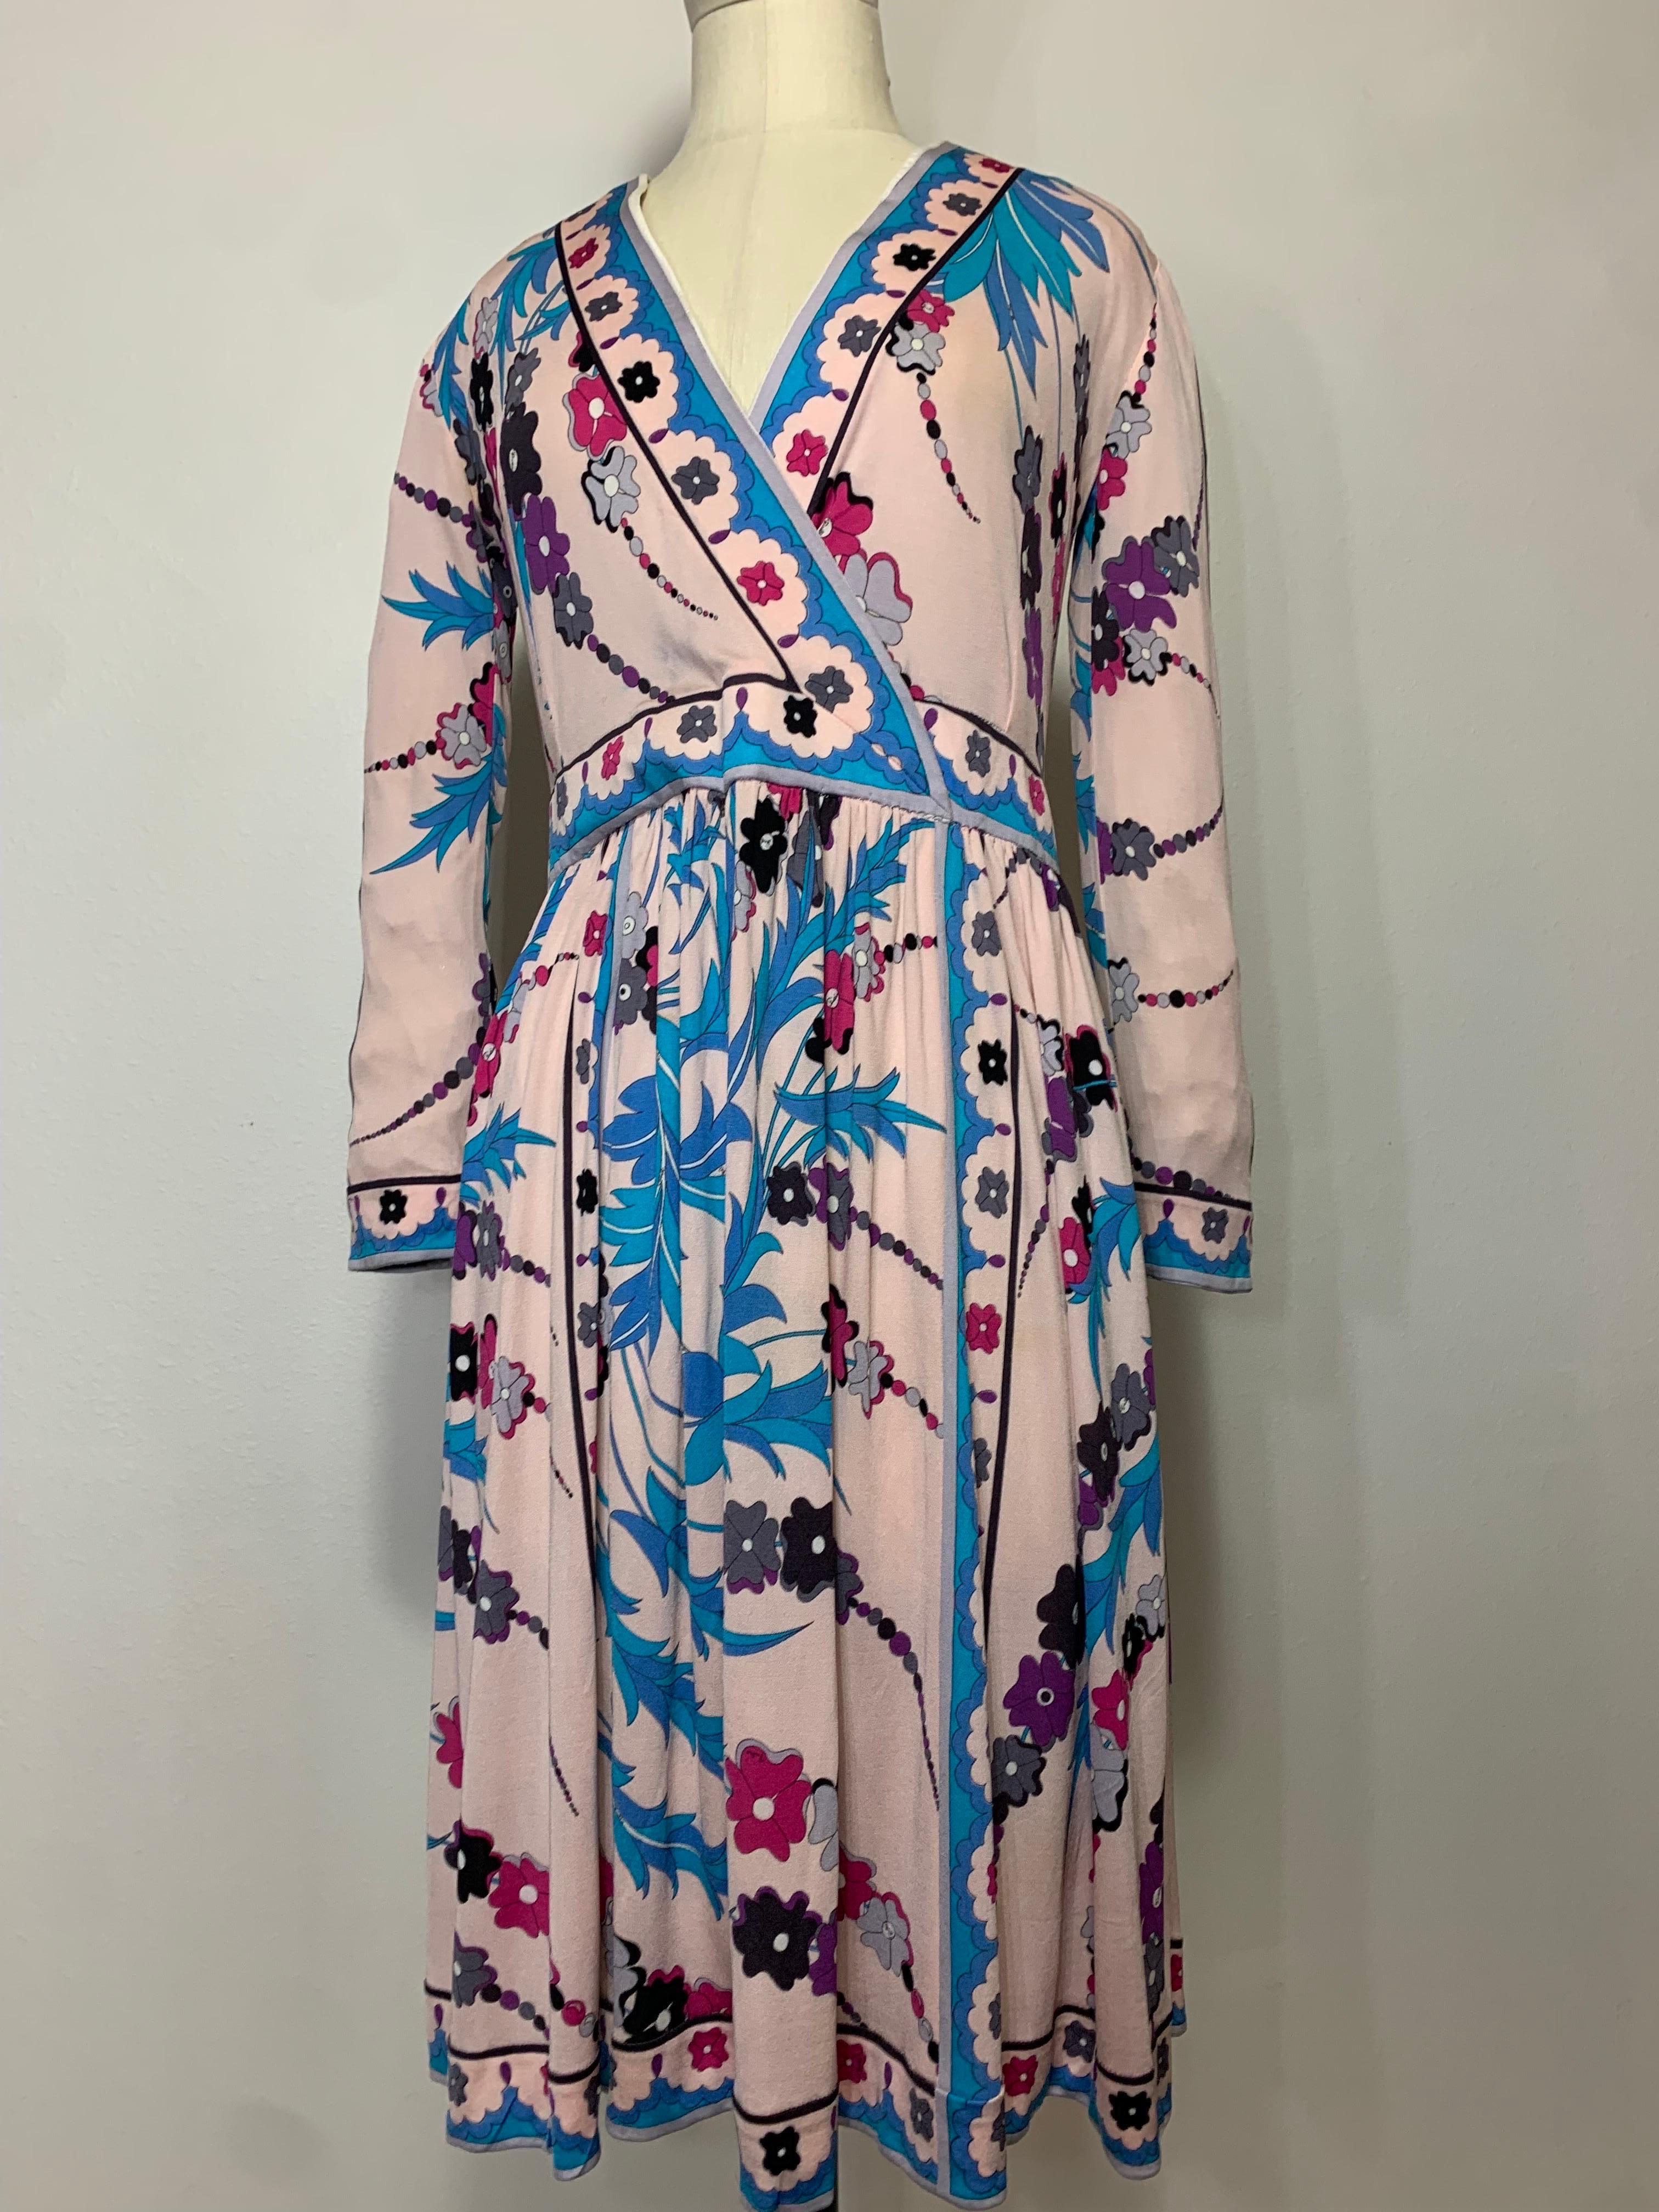 1970s Emilio Pucci Silk Jersey Floral Print Wrap Dress w Full Skirt & Band Trim For Sale 11